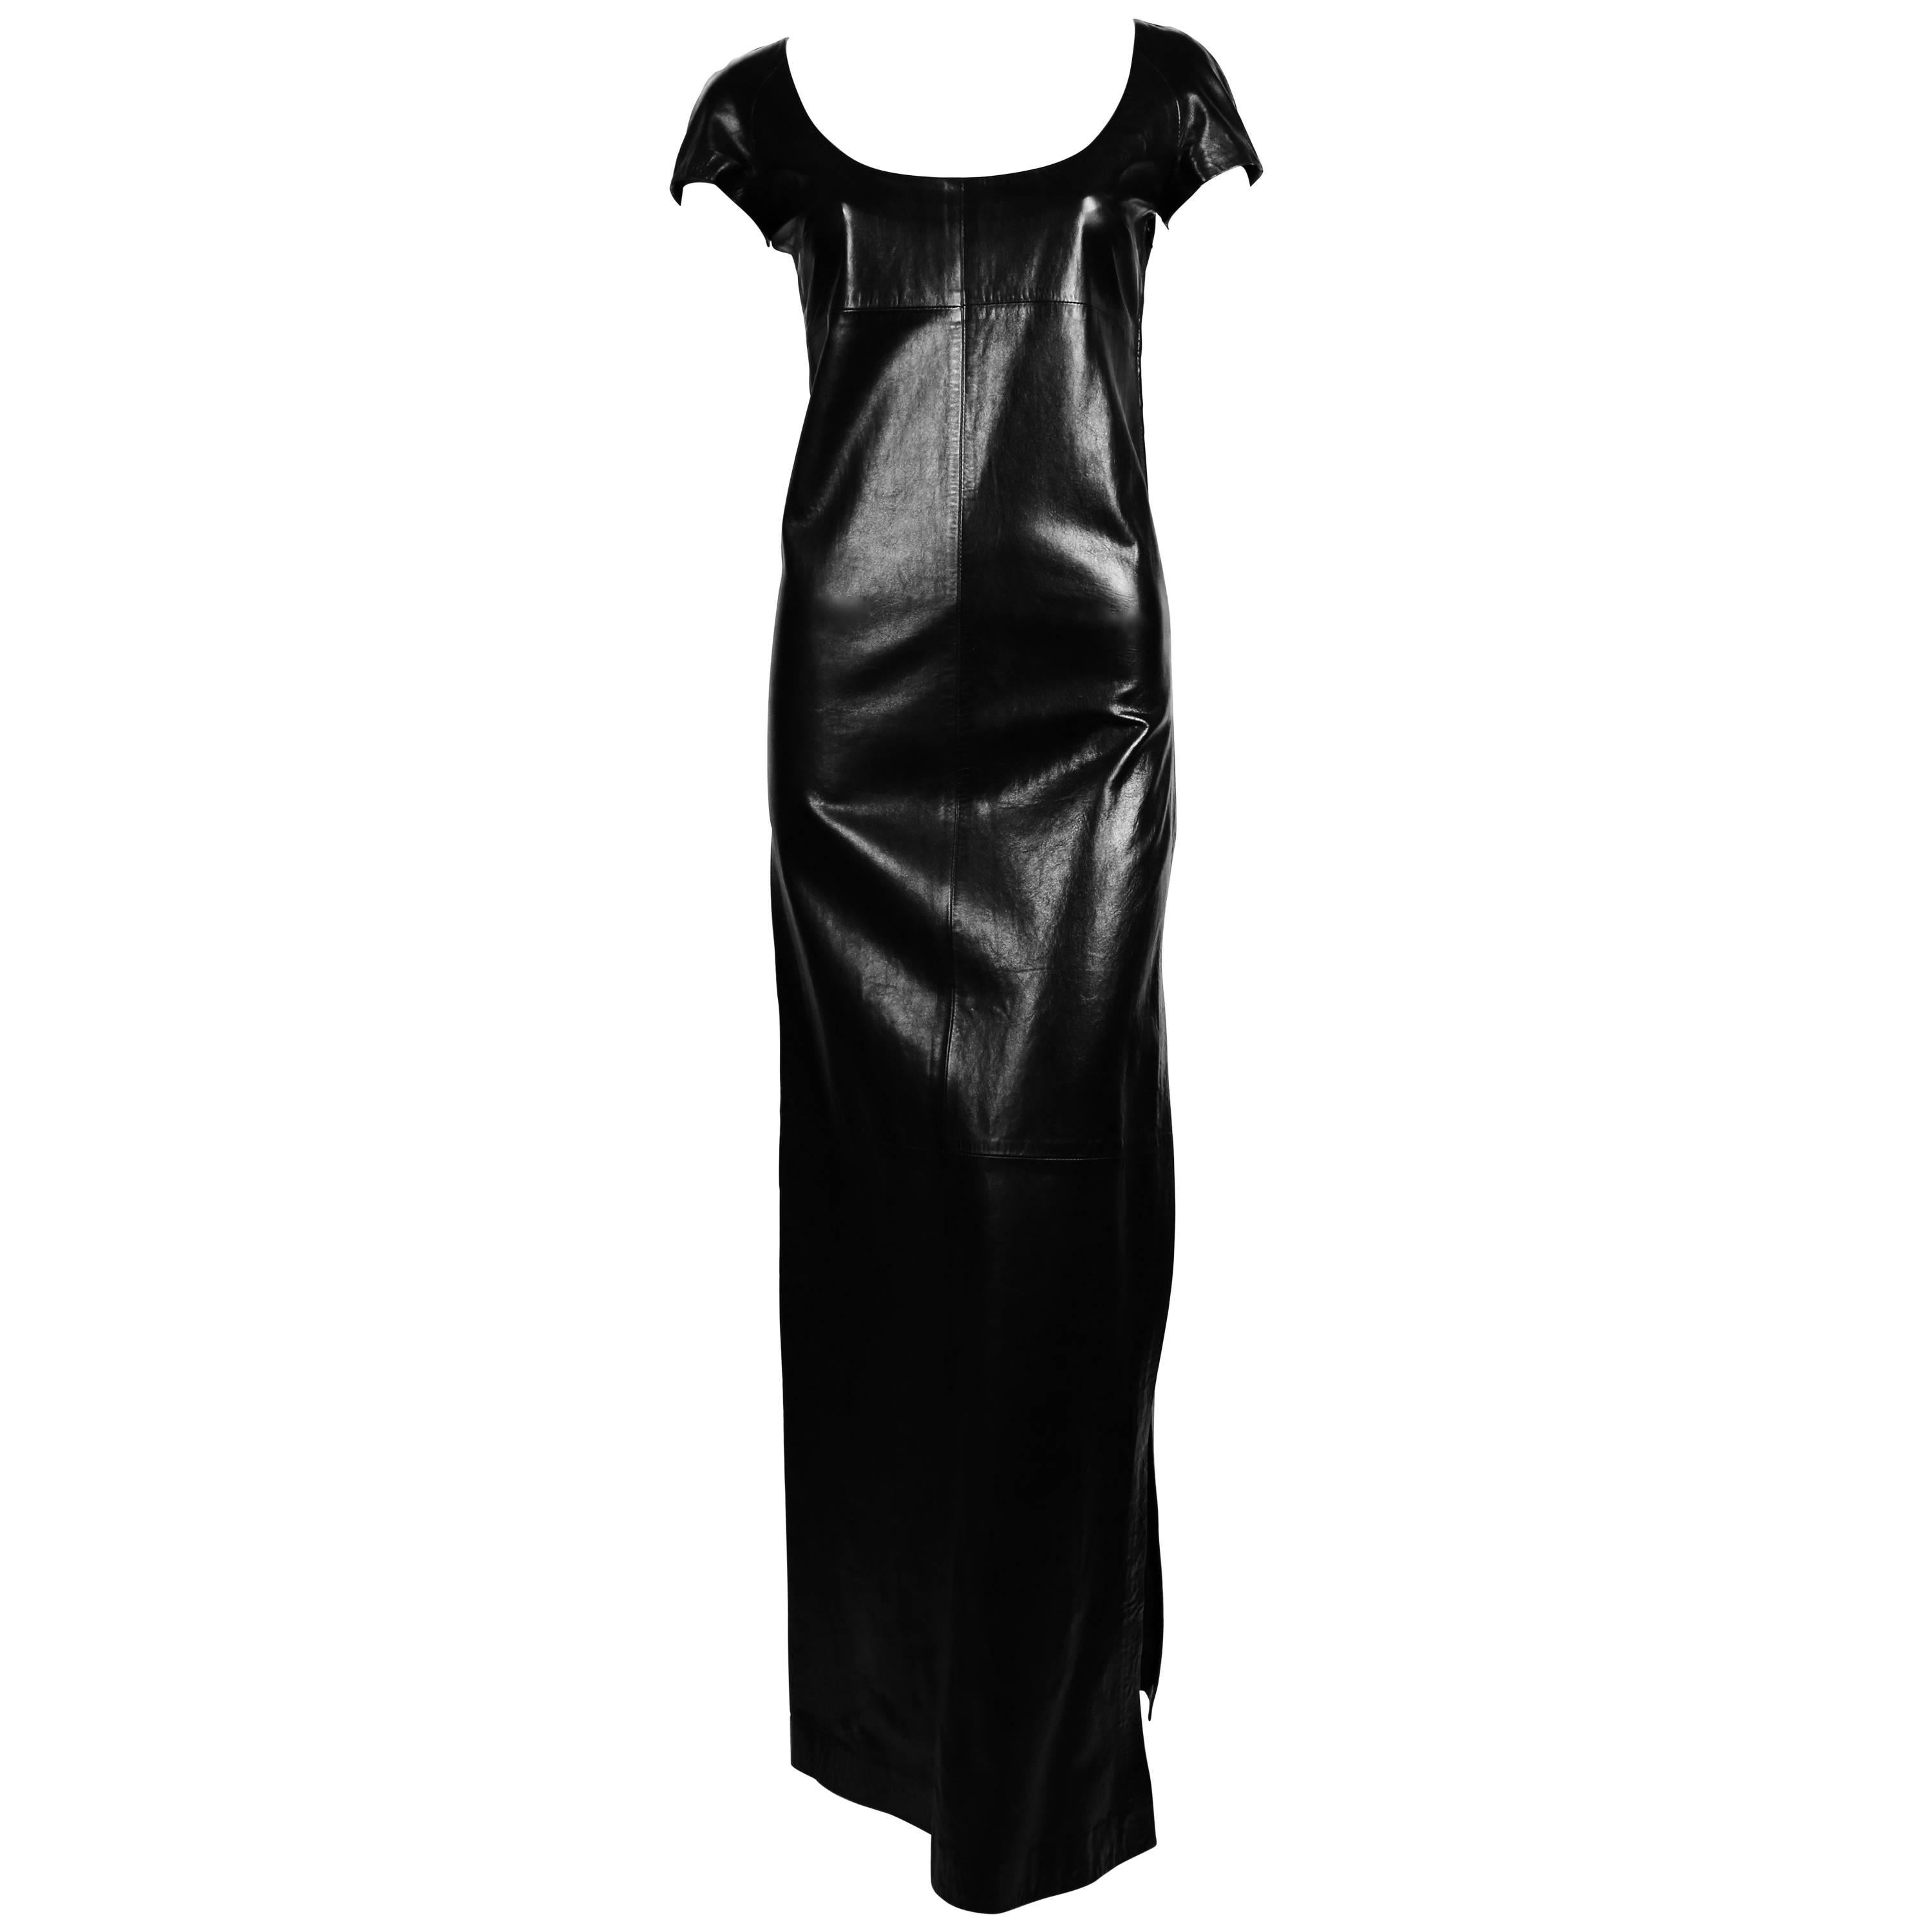 very rare 1990's TOM FORD for GUCCI black leather dress